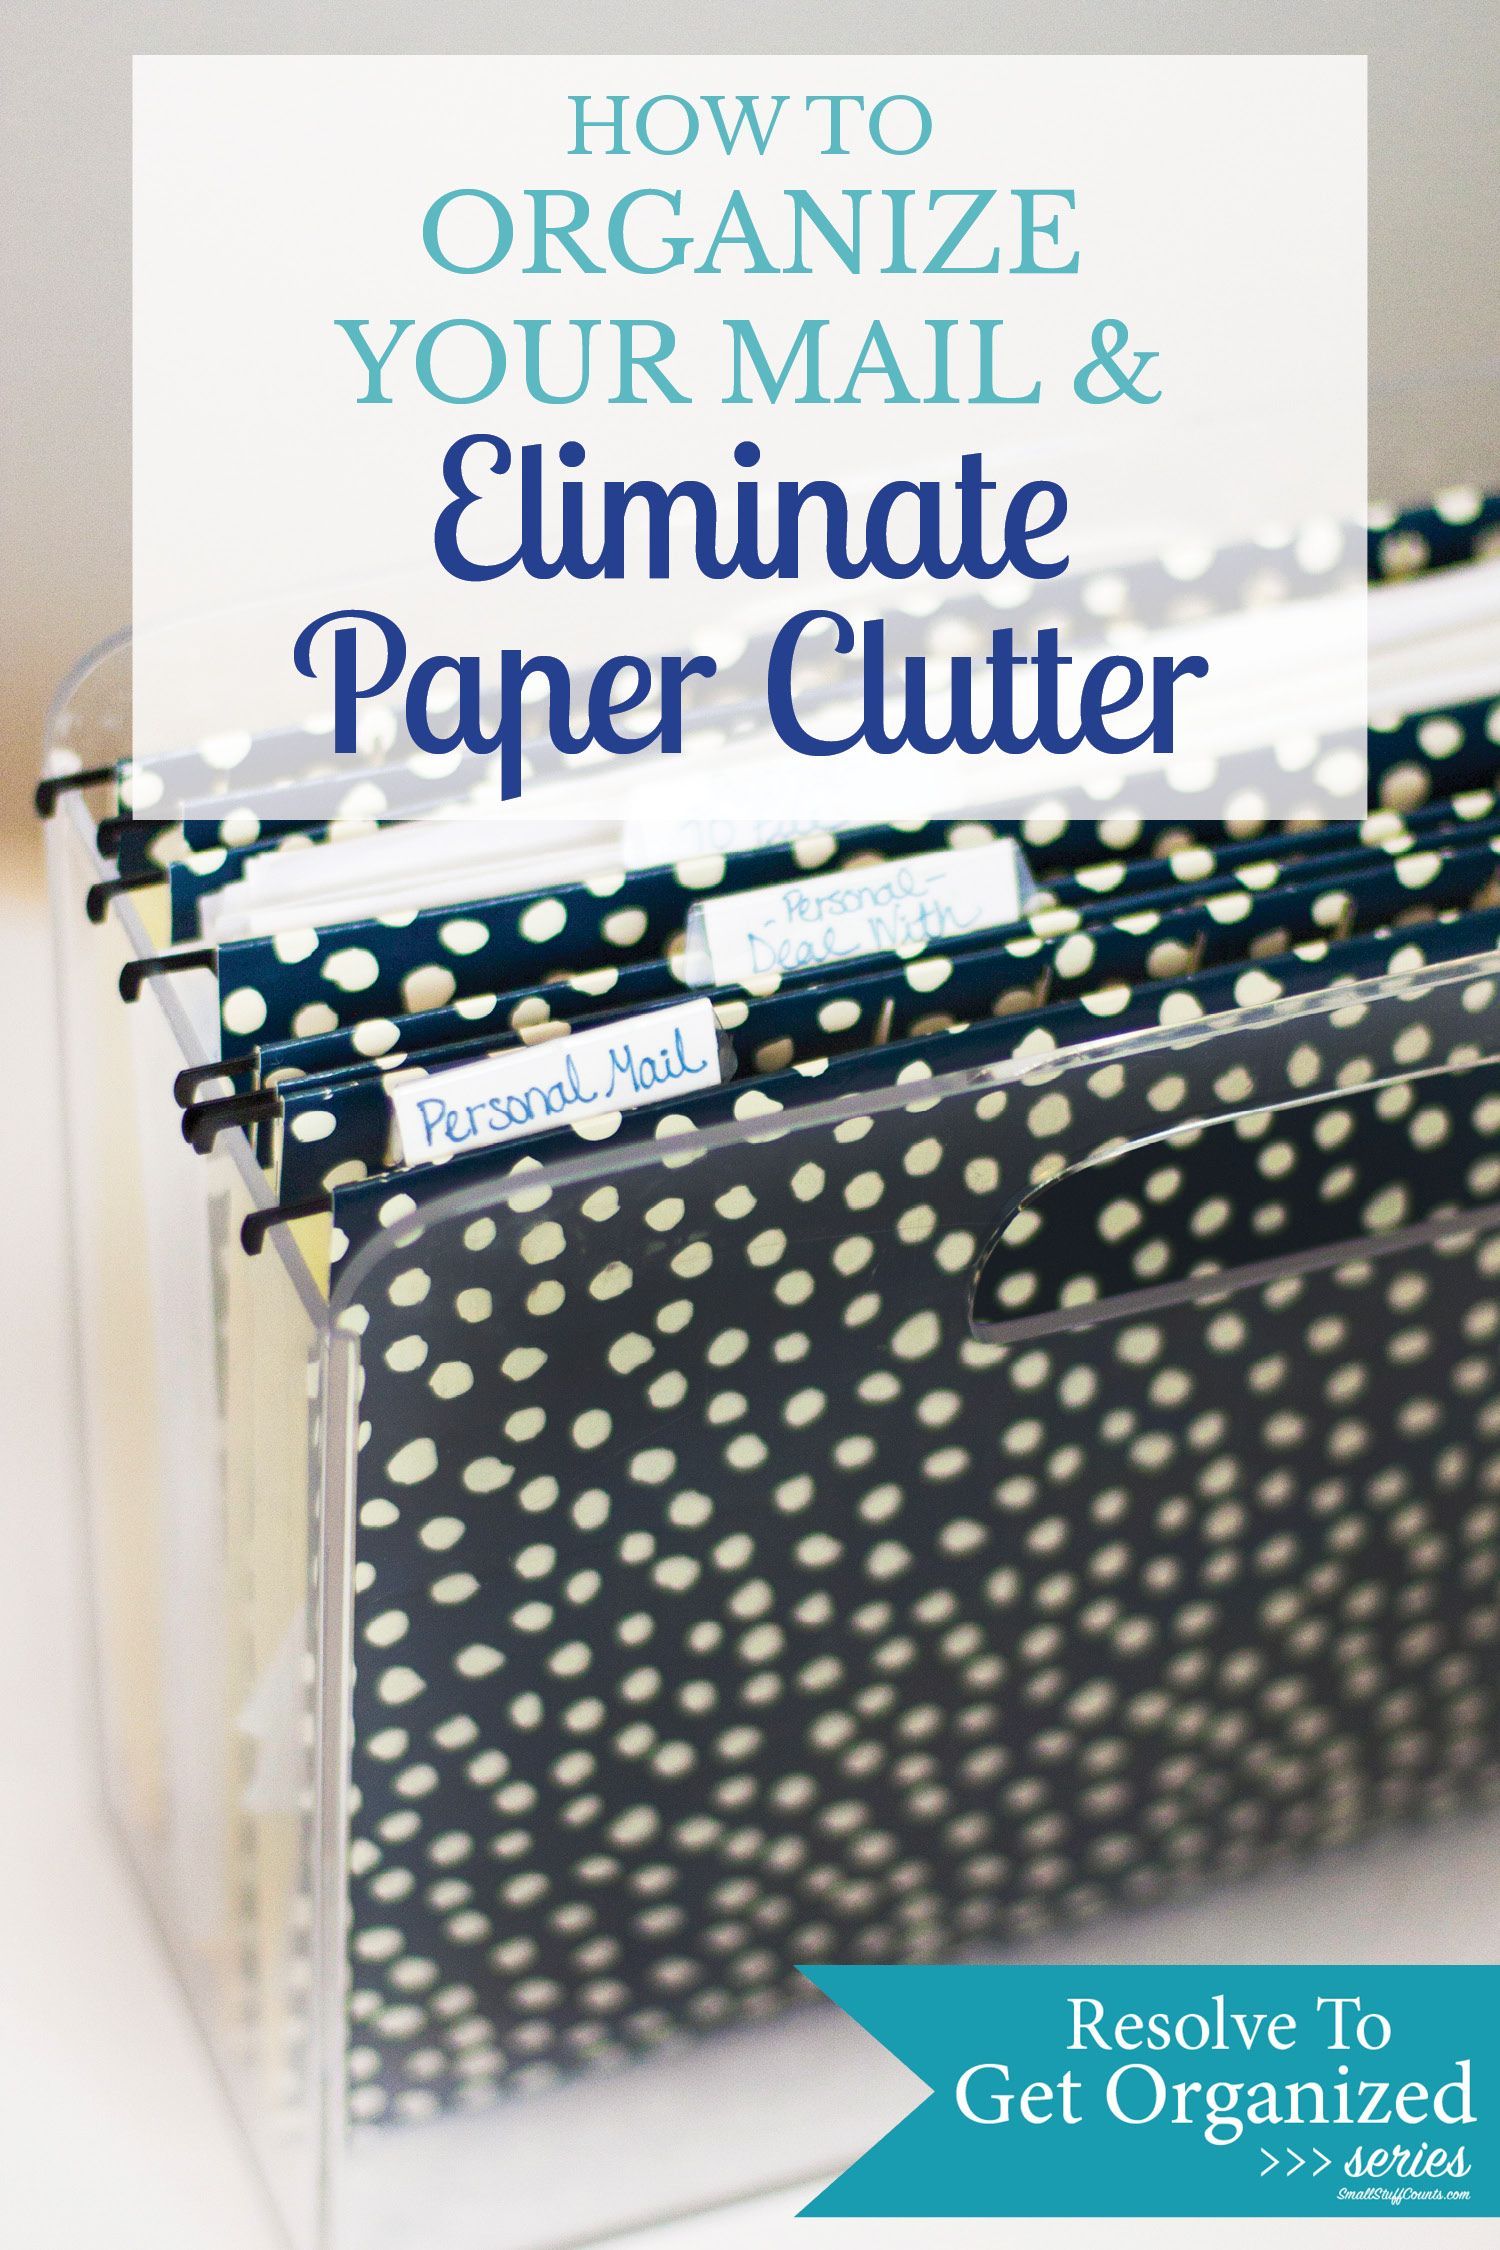 How to Organize Mail to Eliminate Paper Clutter -   24 diy organization mail ideas